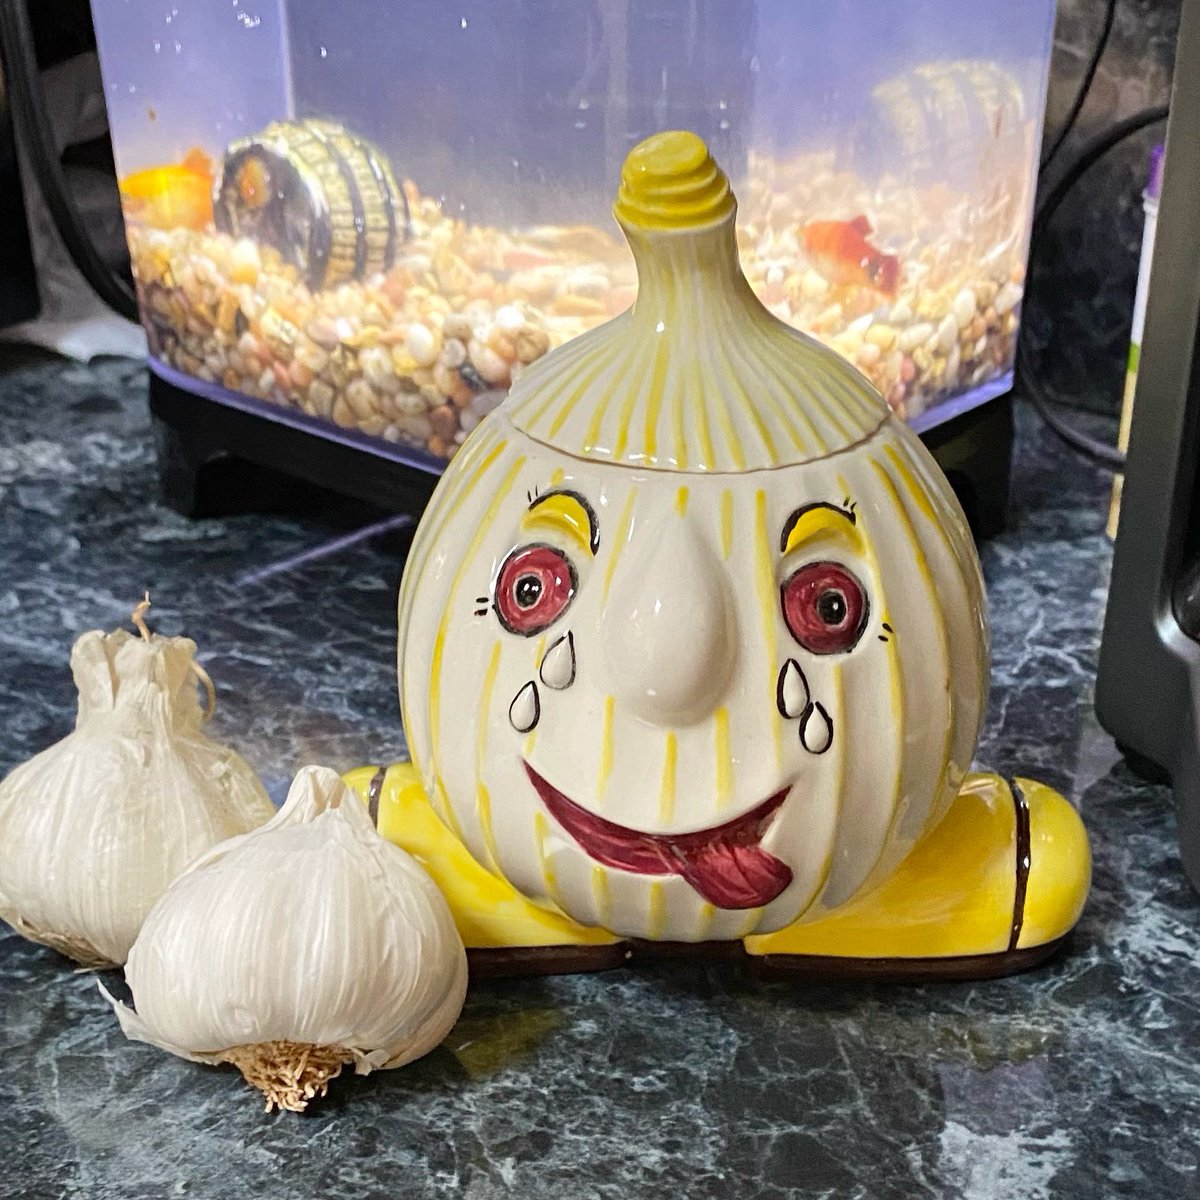 Onion or garlic? The lovely lady I purchased him from corrected me when I called him an onion.
Thoughts? etsy.com/listing/148448… 🧅 👀🧄 
#vintagekitchen #vintagekitsch #etsyfinds #etsyvintage #anthropomorphic #1970skitchen #kitchendecor #kitchenorganization #garlicman #onionman